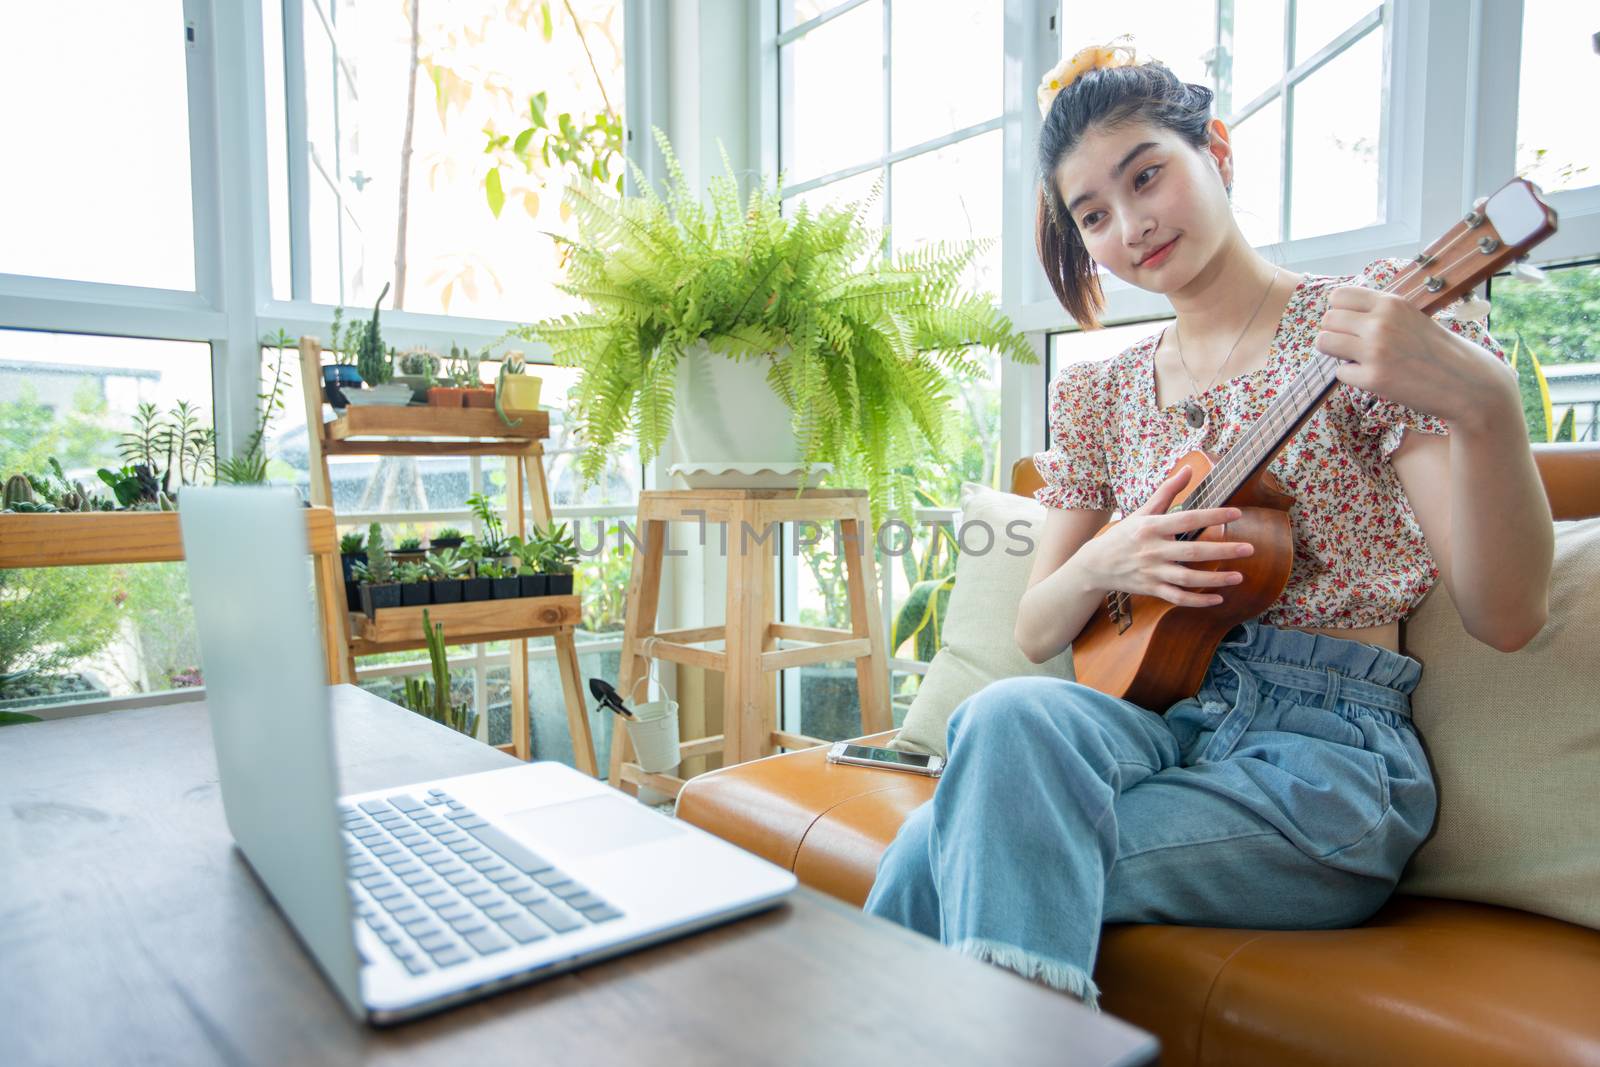 Asian women use their notebook computers to study and practice playing ukulele on the internet at home. by Tuiphotoengineer